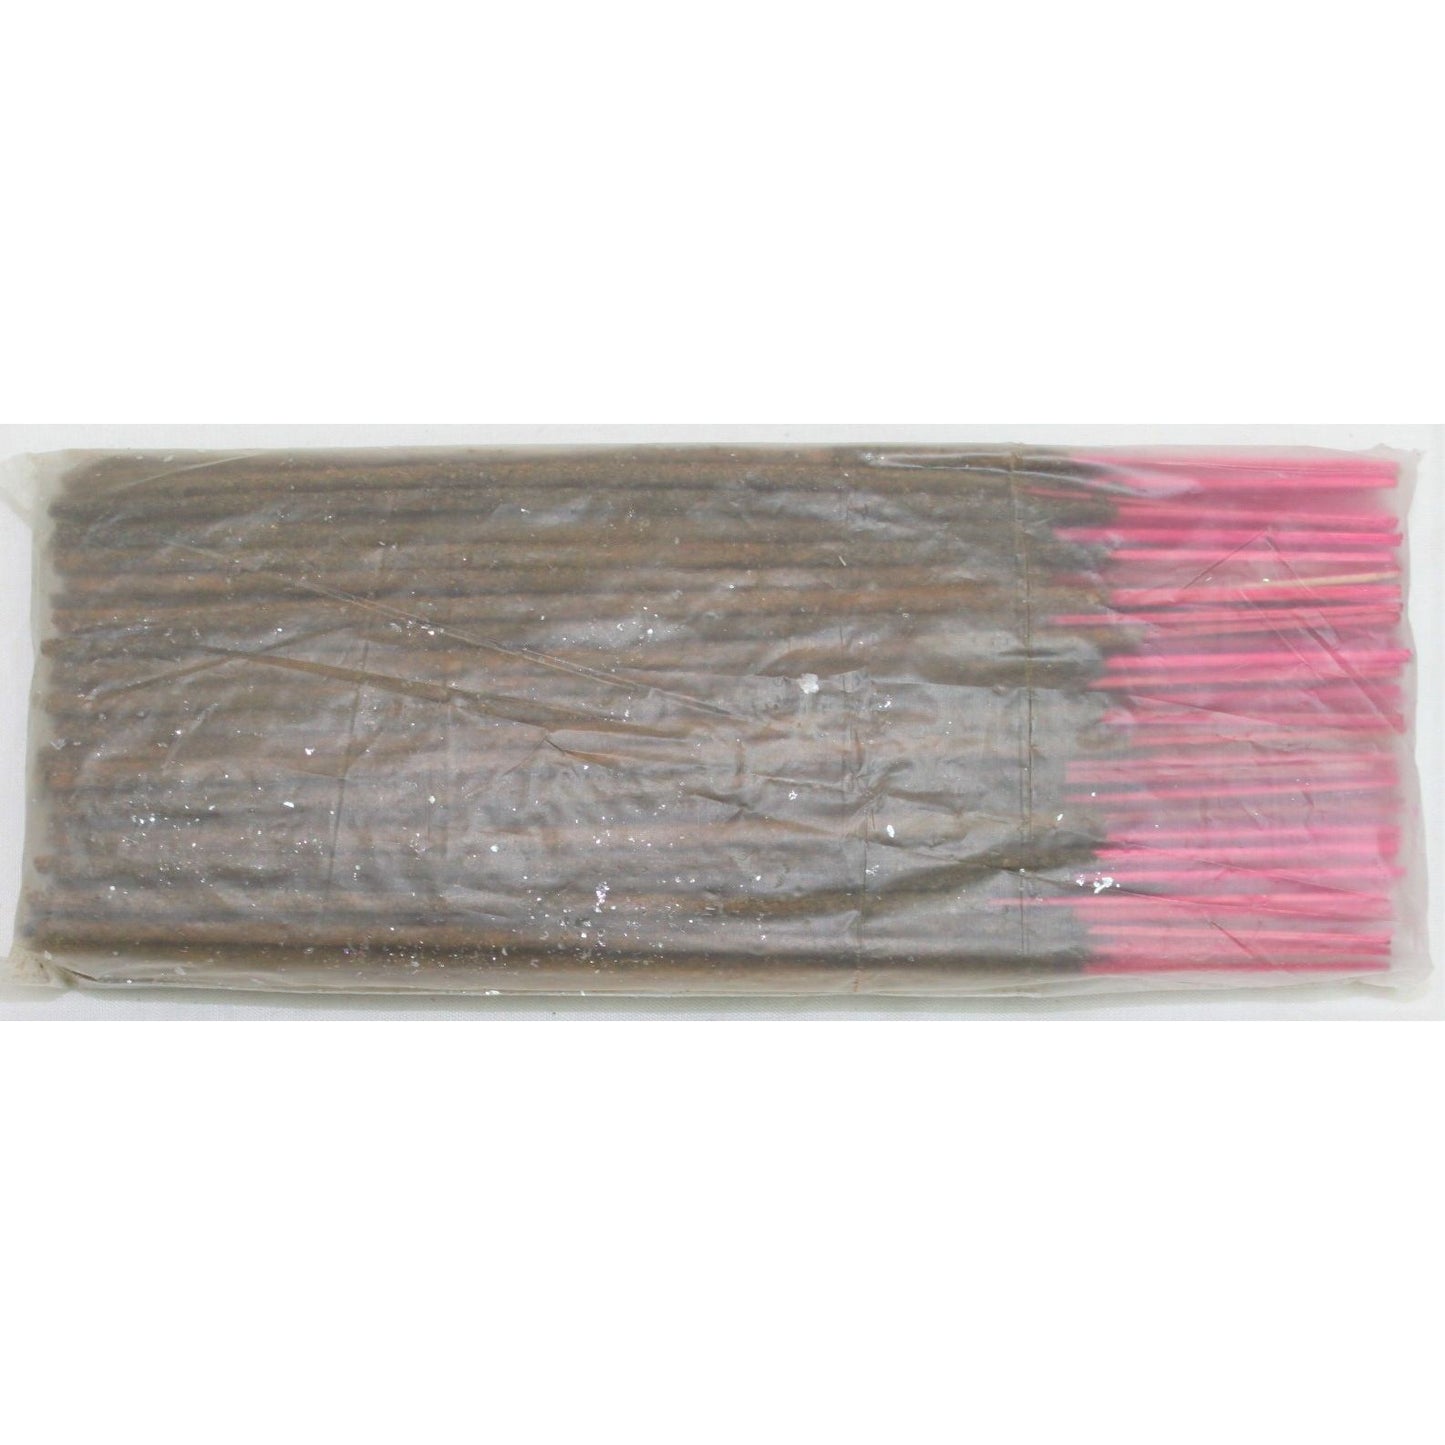 Incense From India - Tropical Sun